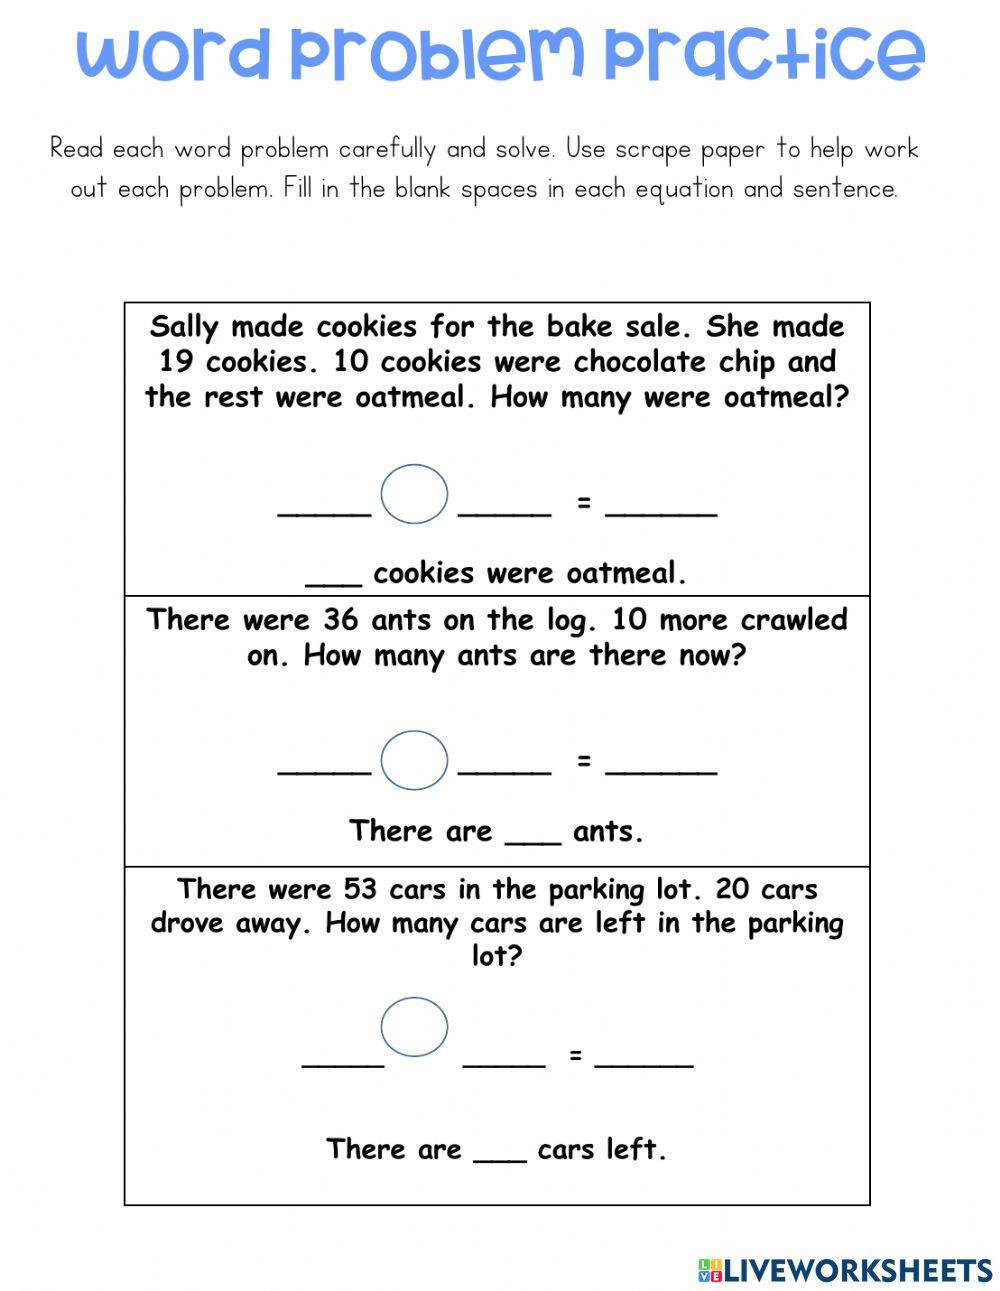 Word Problems 2